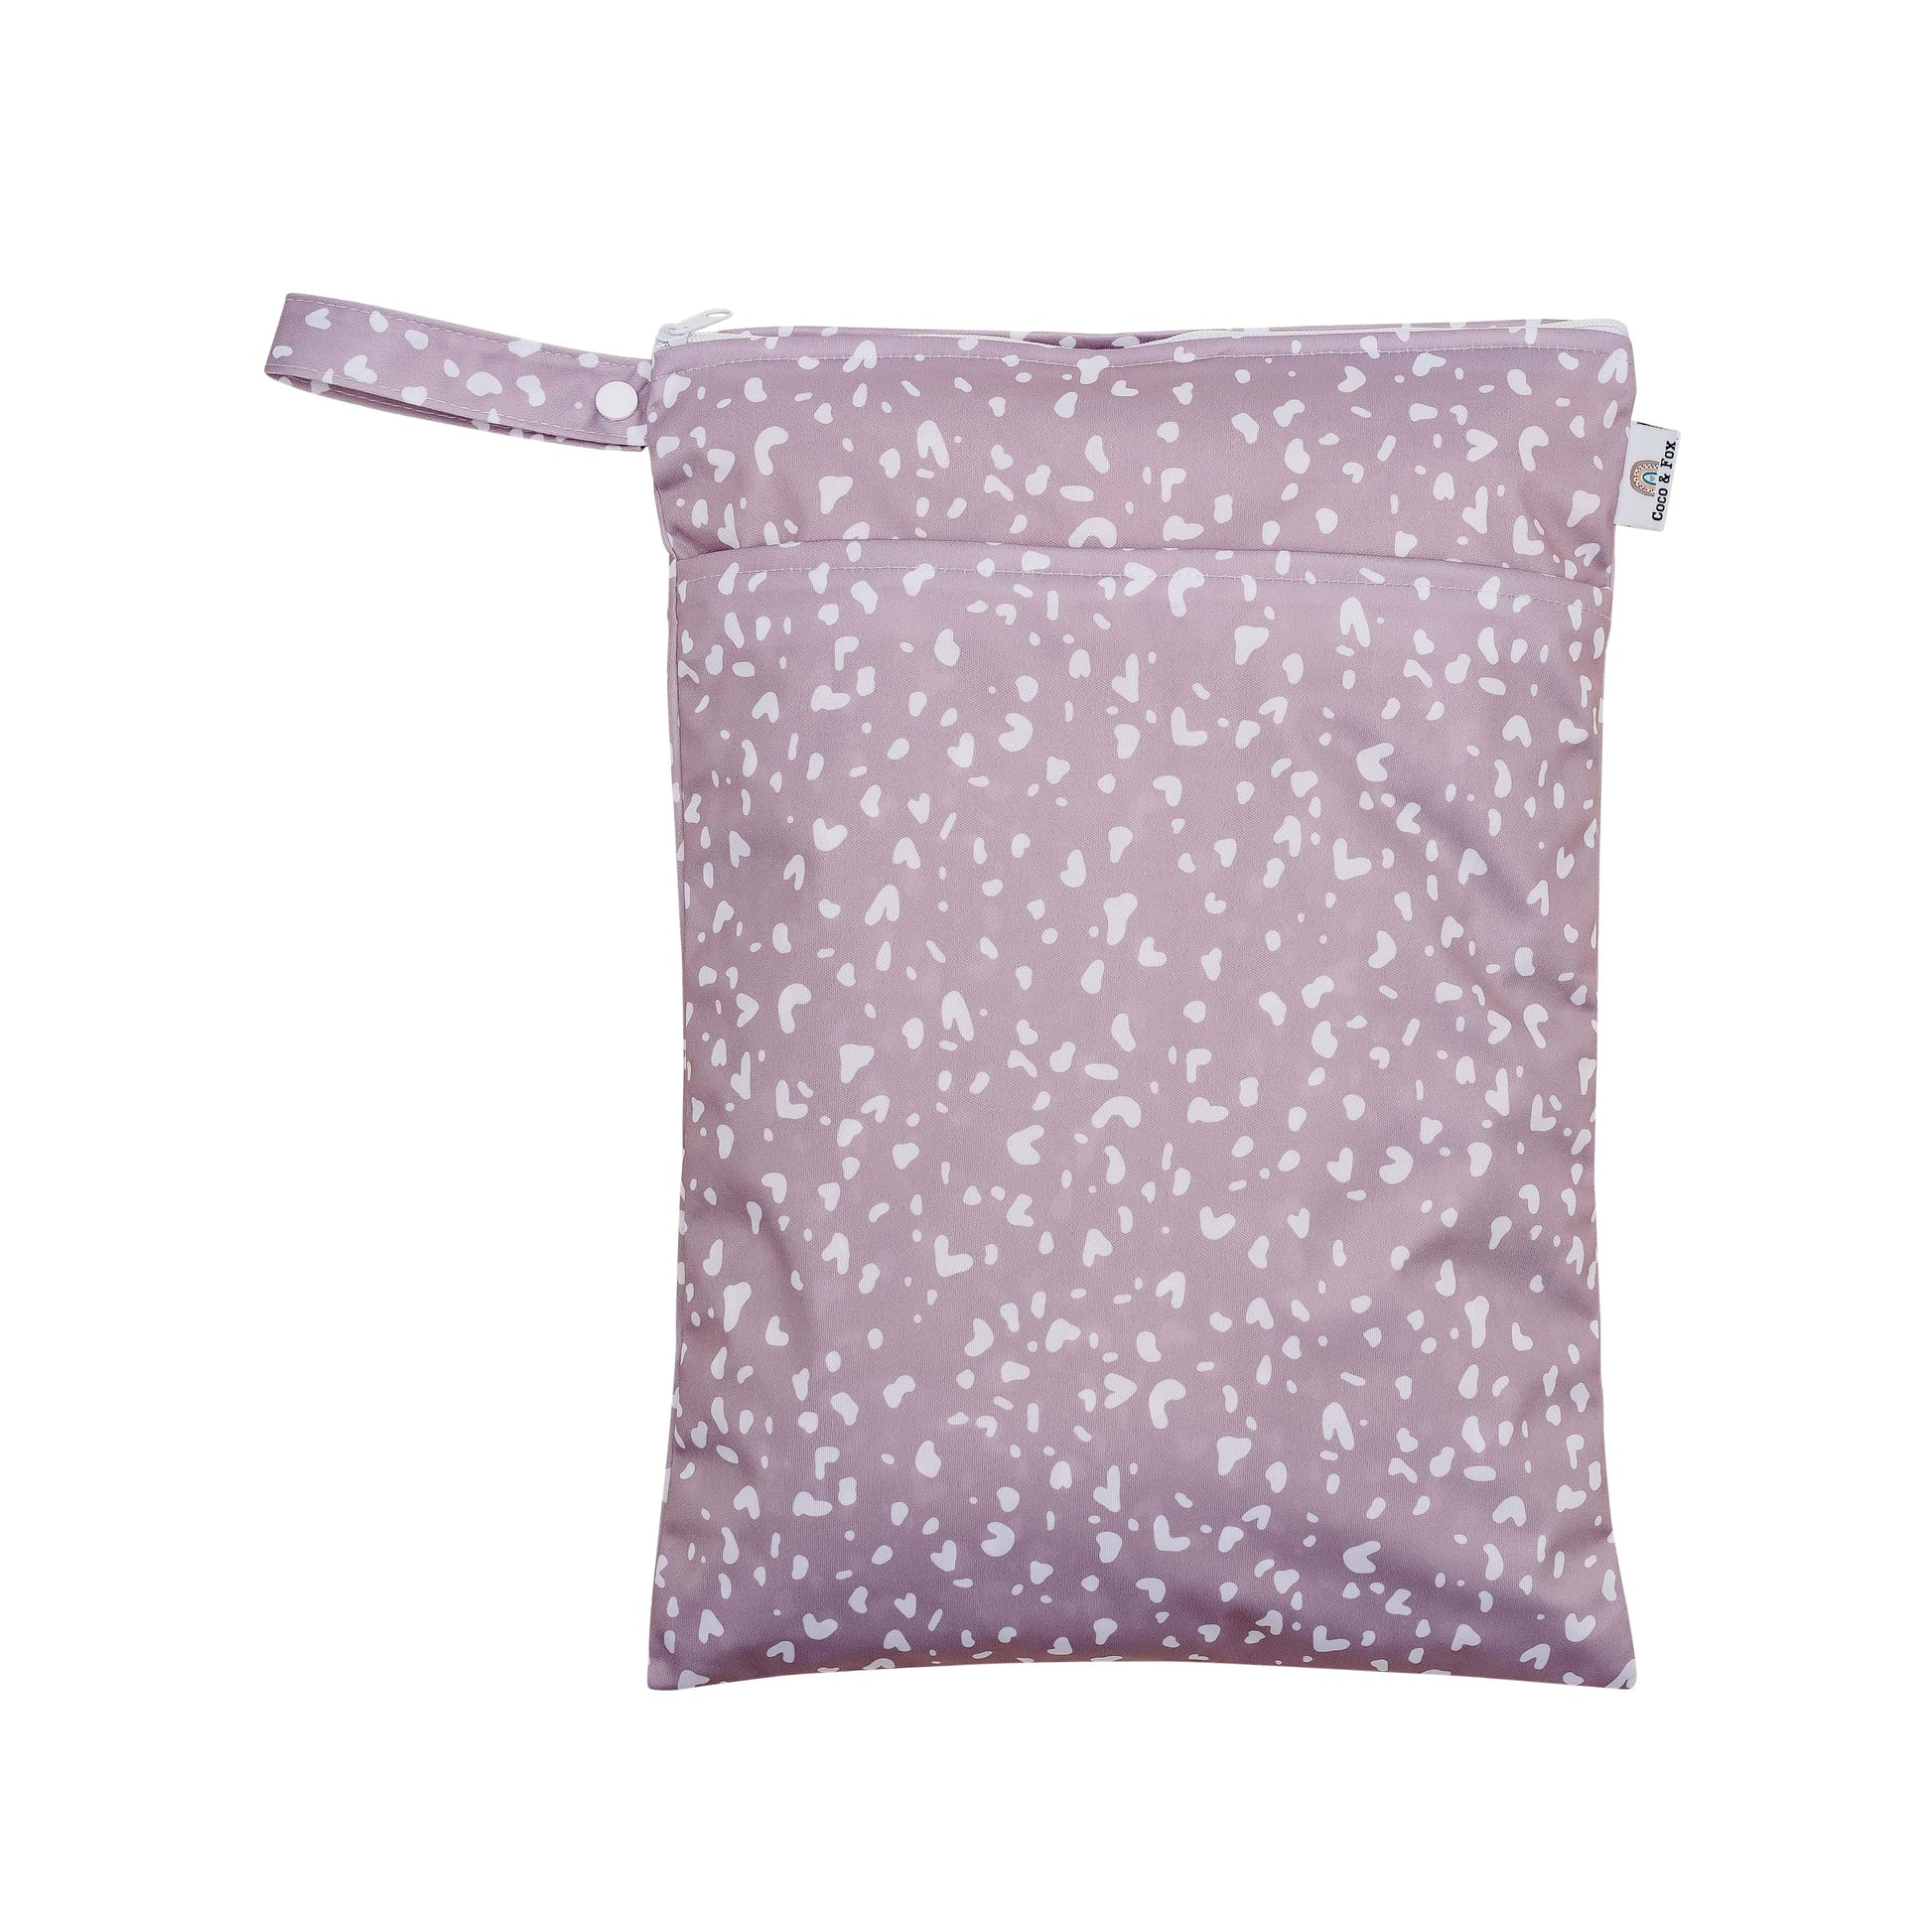 Lightweight water-resistant wet bag.  Featuring two zip pockets to separate wet and dry items, with a snap handle to attach to your pram or store in your everyday baby bag. This bag is mauve with white heart shapes.     